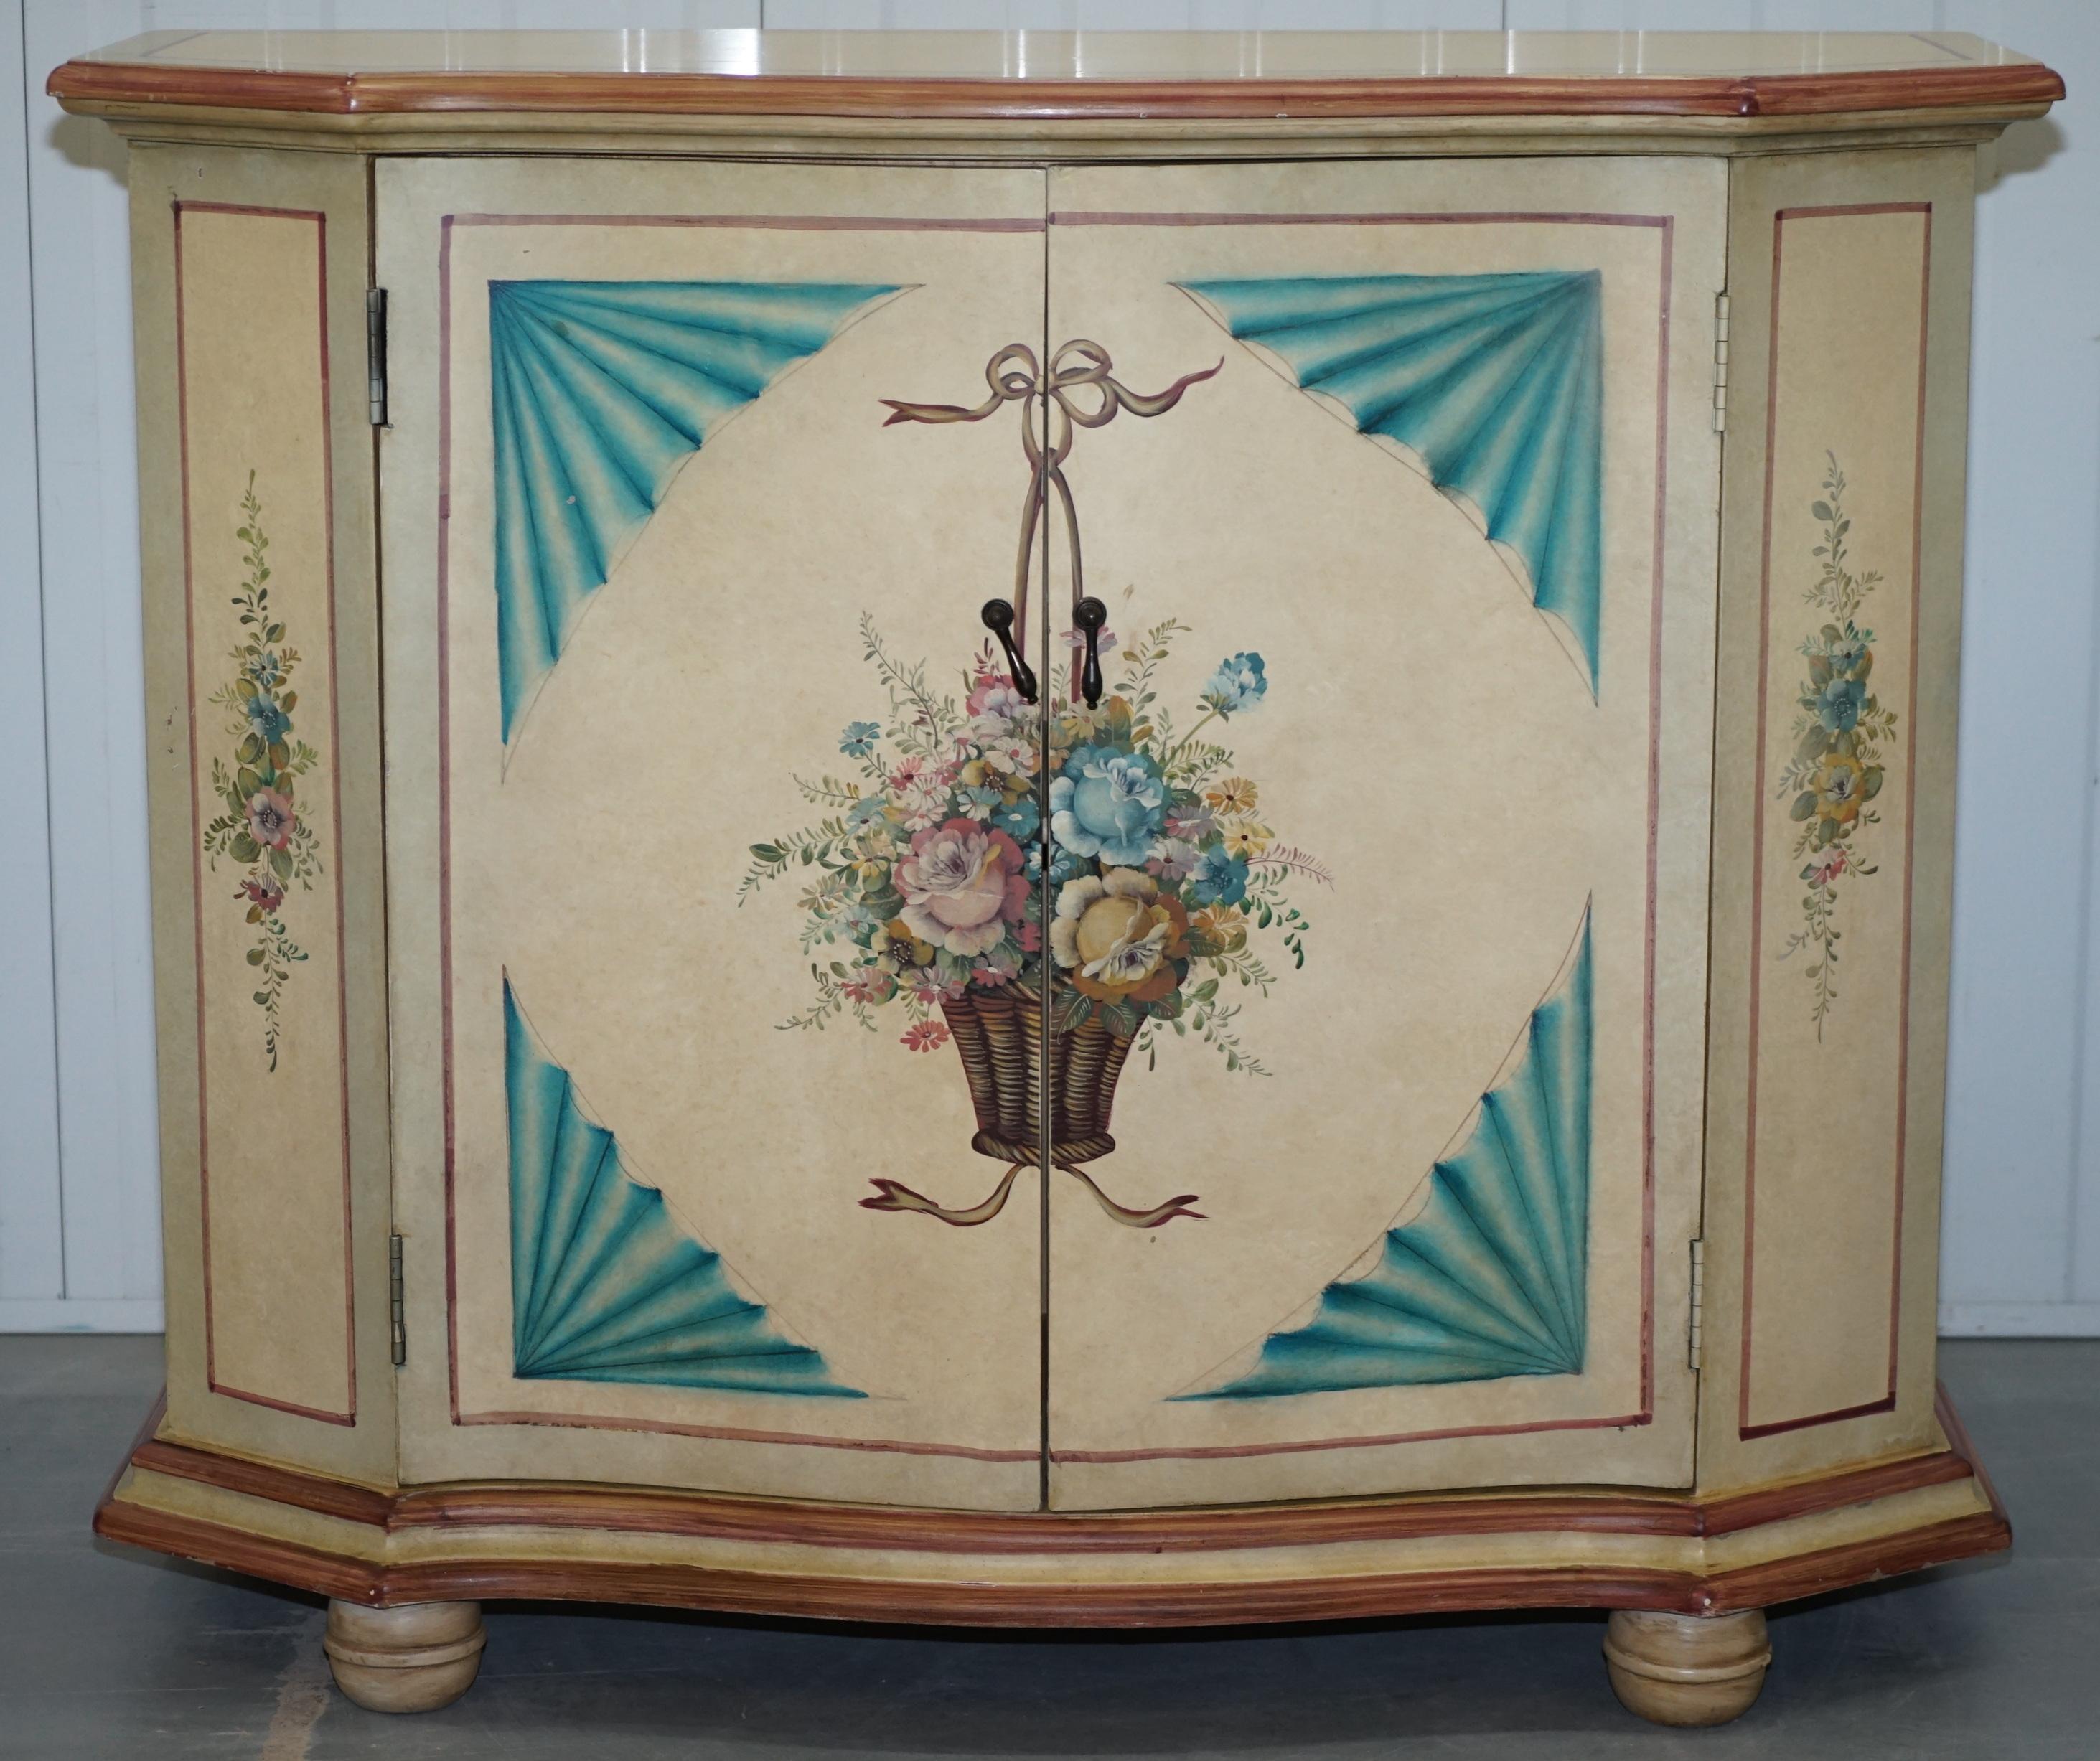 1 of 2 Vintage Painted Flowers French Serpentine Fronted Sideboards Cupboards 1